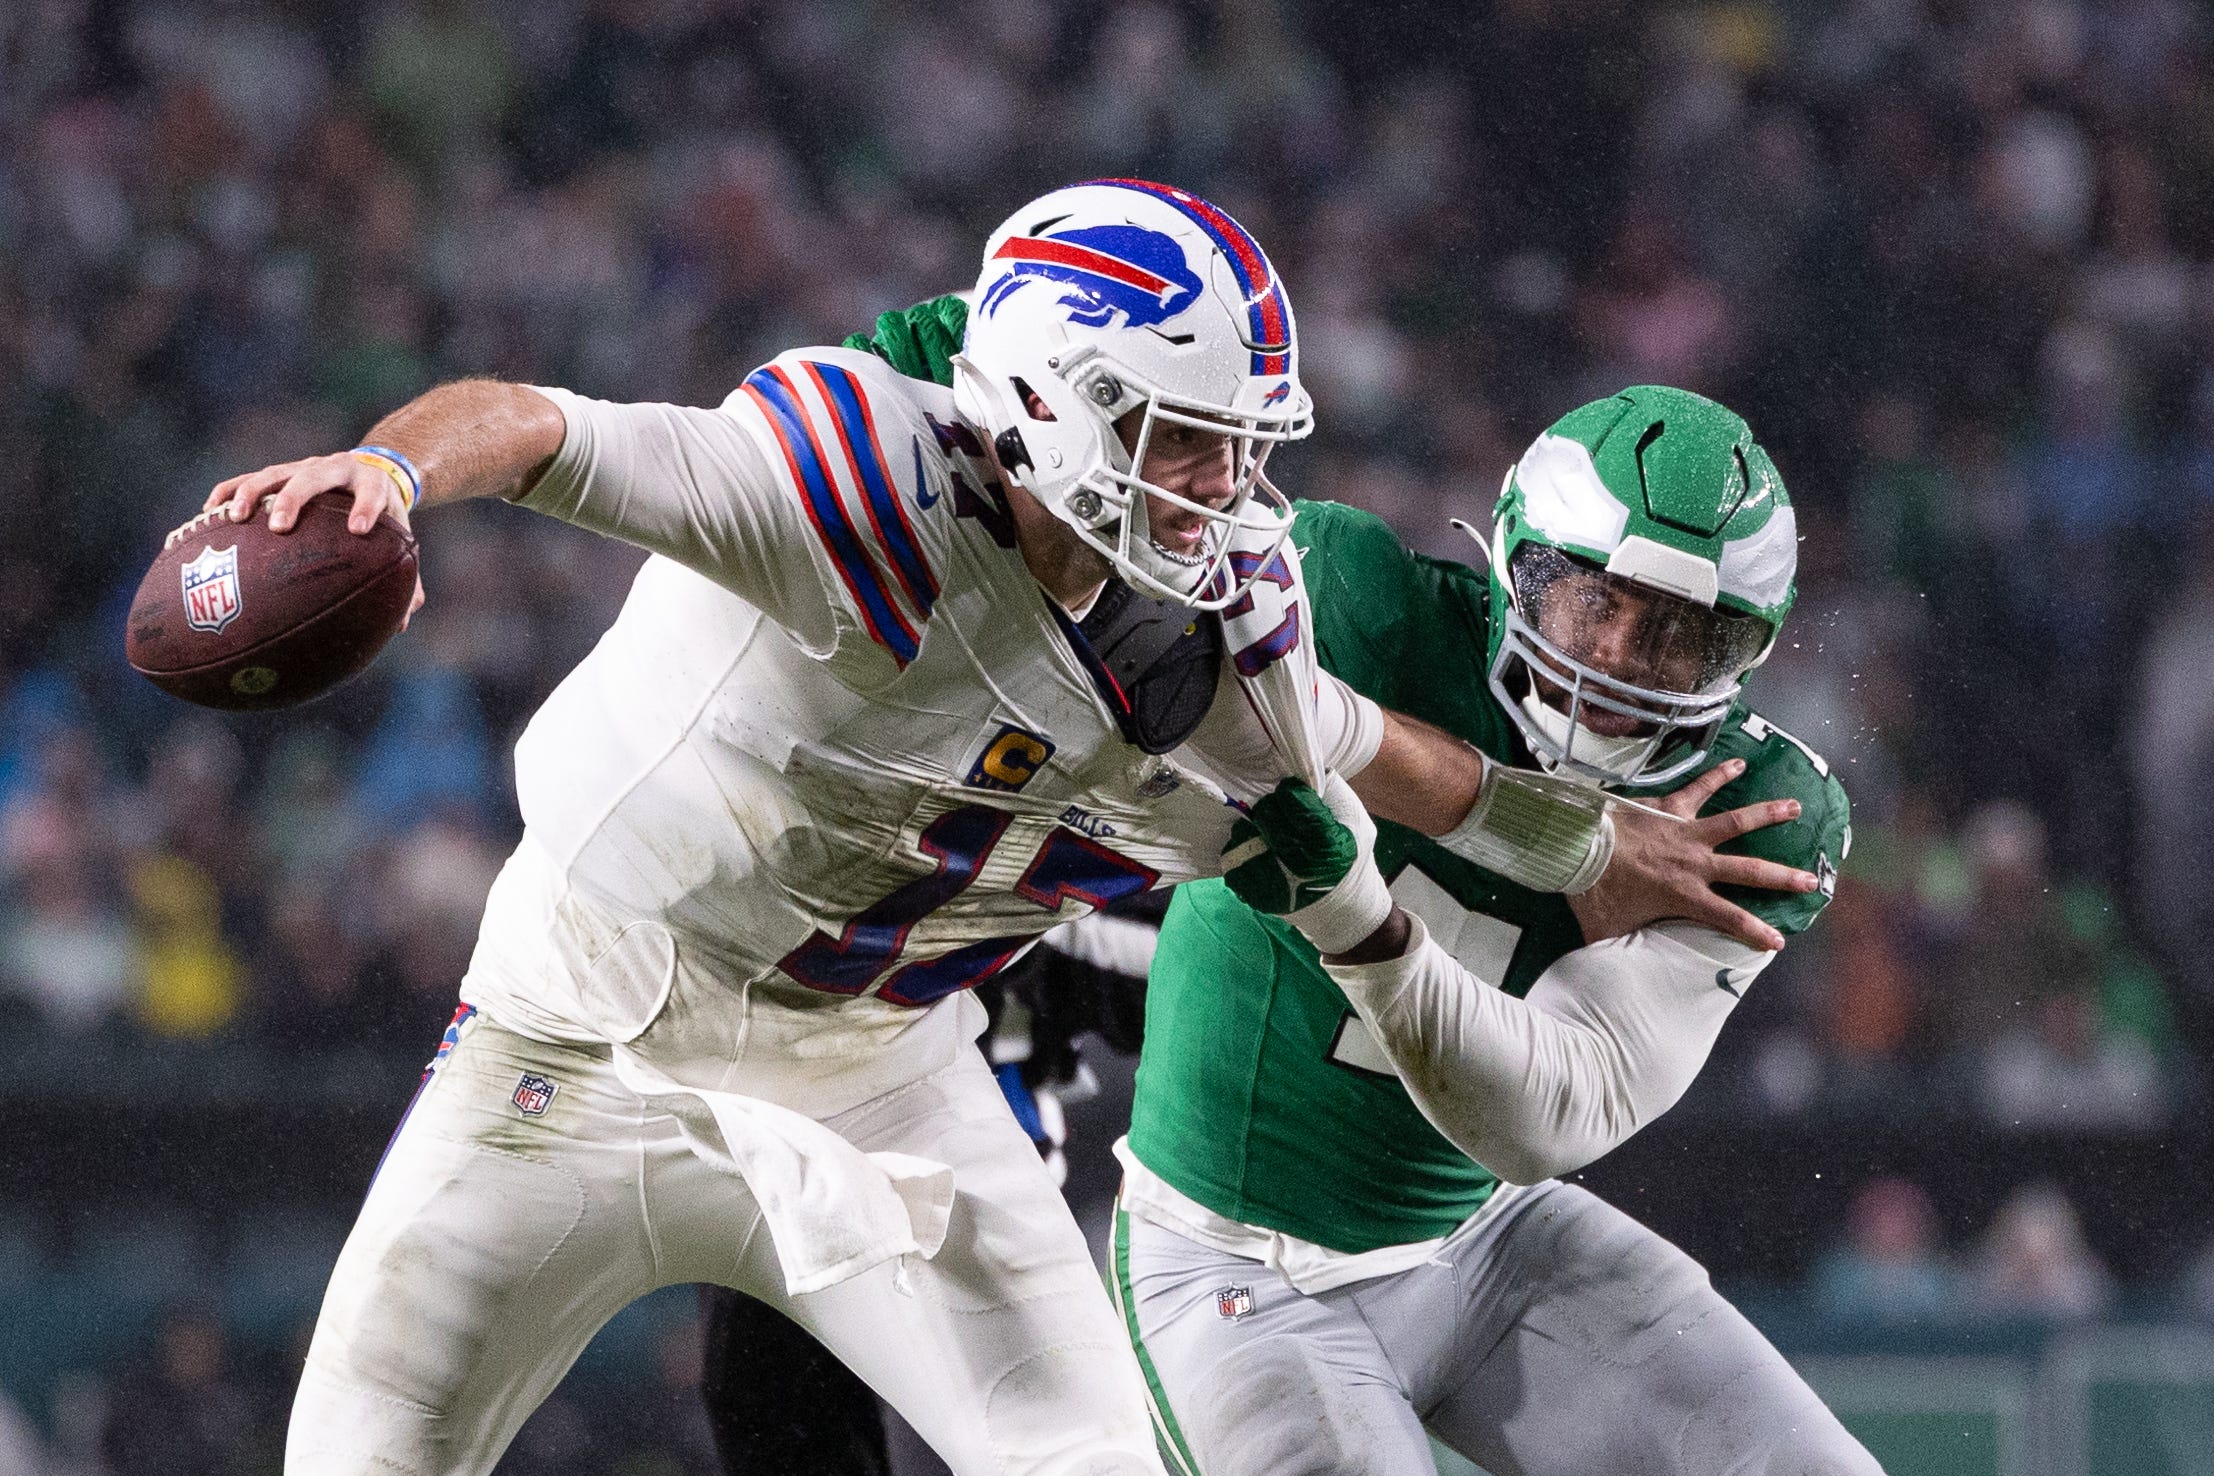 no-call for potential horse-collar tackle on josh allen plays key role in bills' loss to eagles